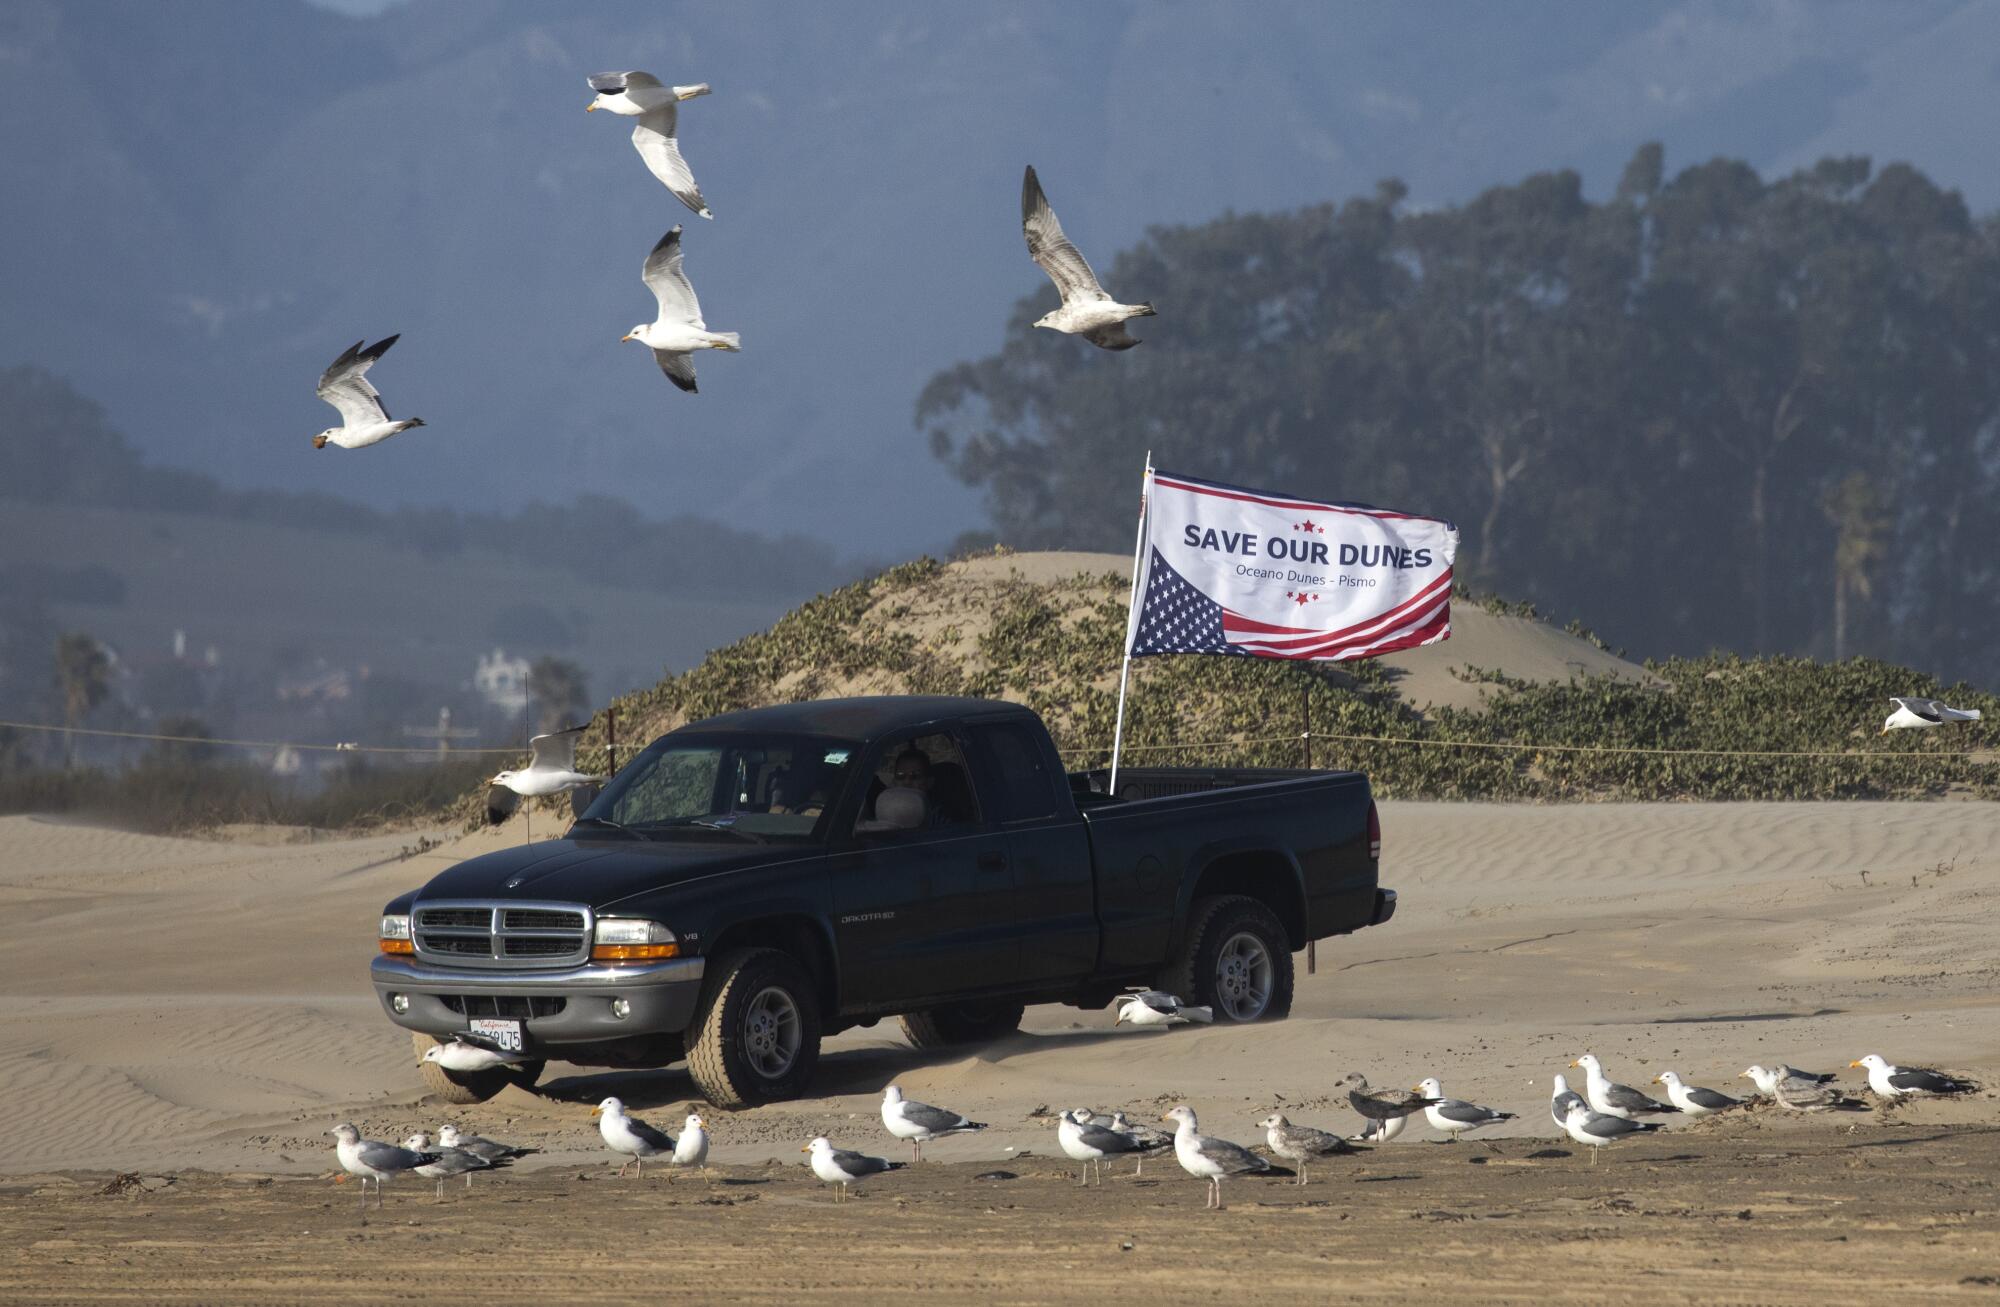 A truck sporting a "save our dunes" flag amid a flock of seagulls on the beach